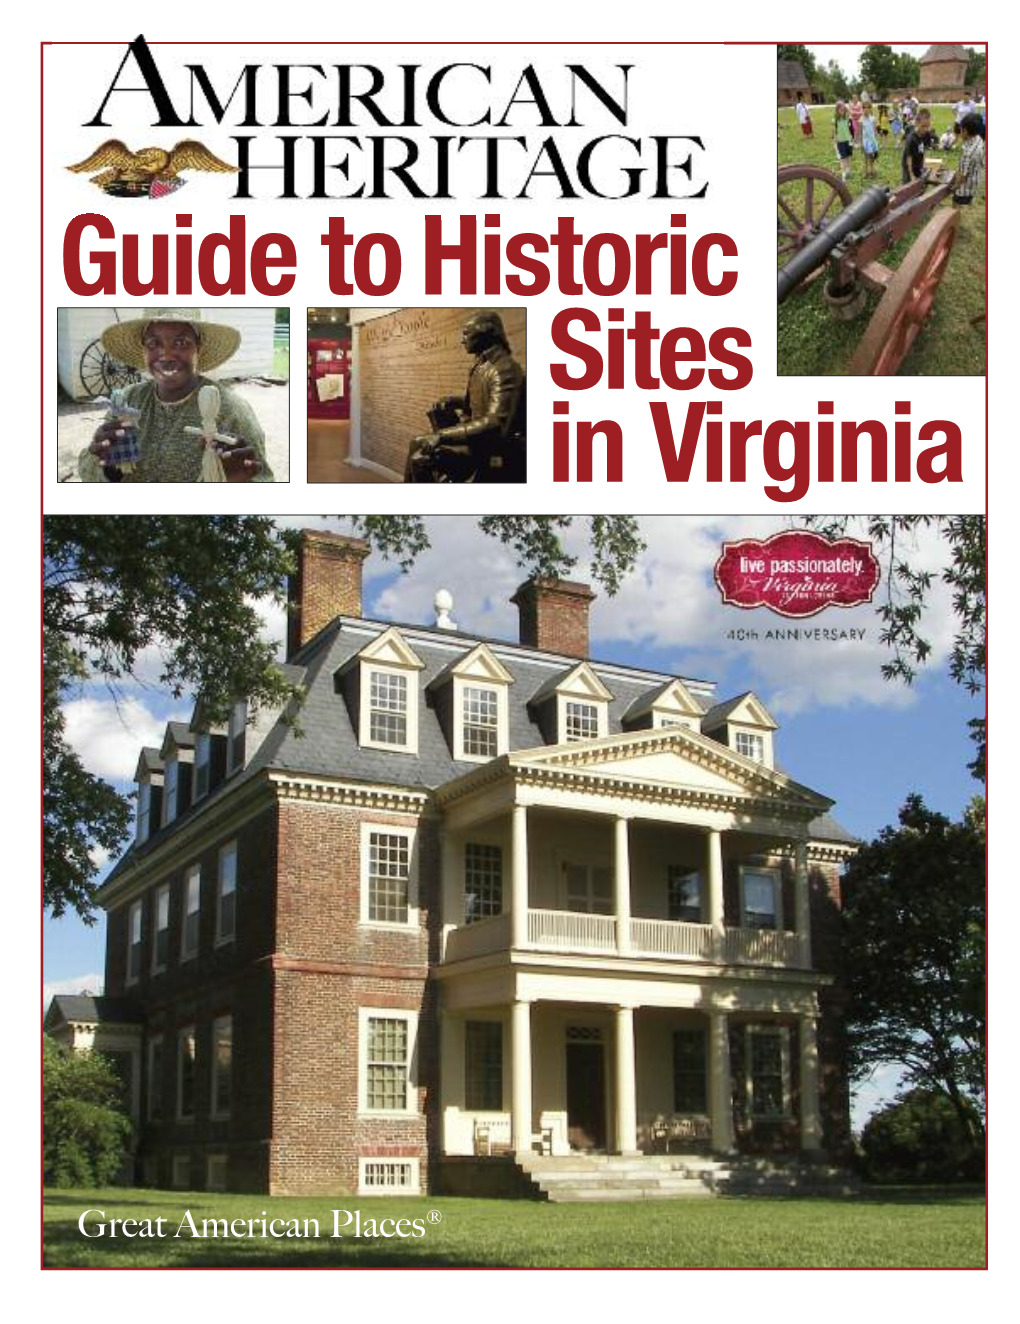 Guide to Historic Sites in Virginia